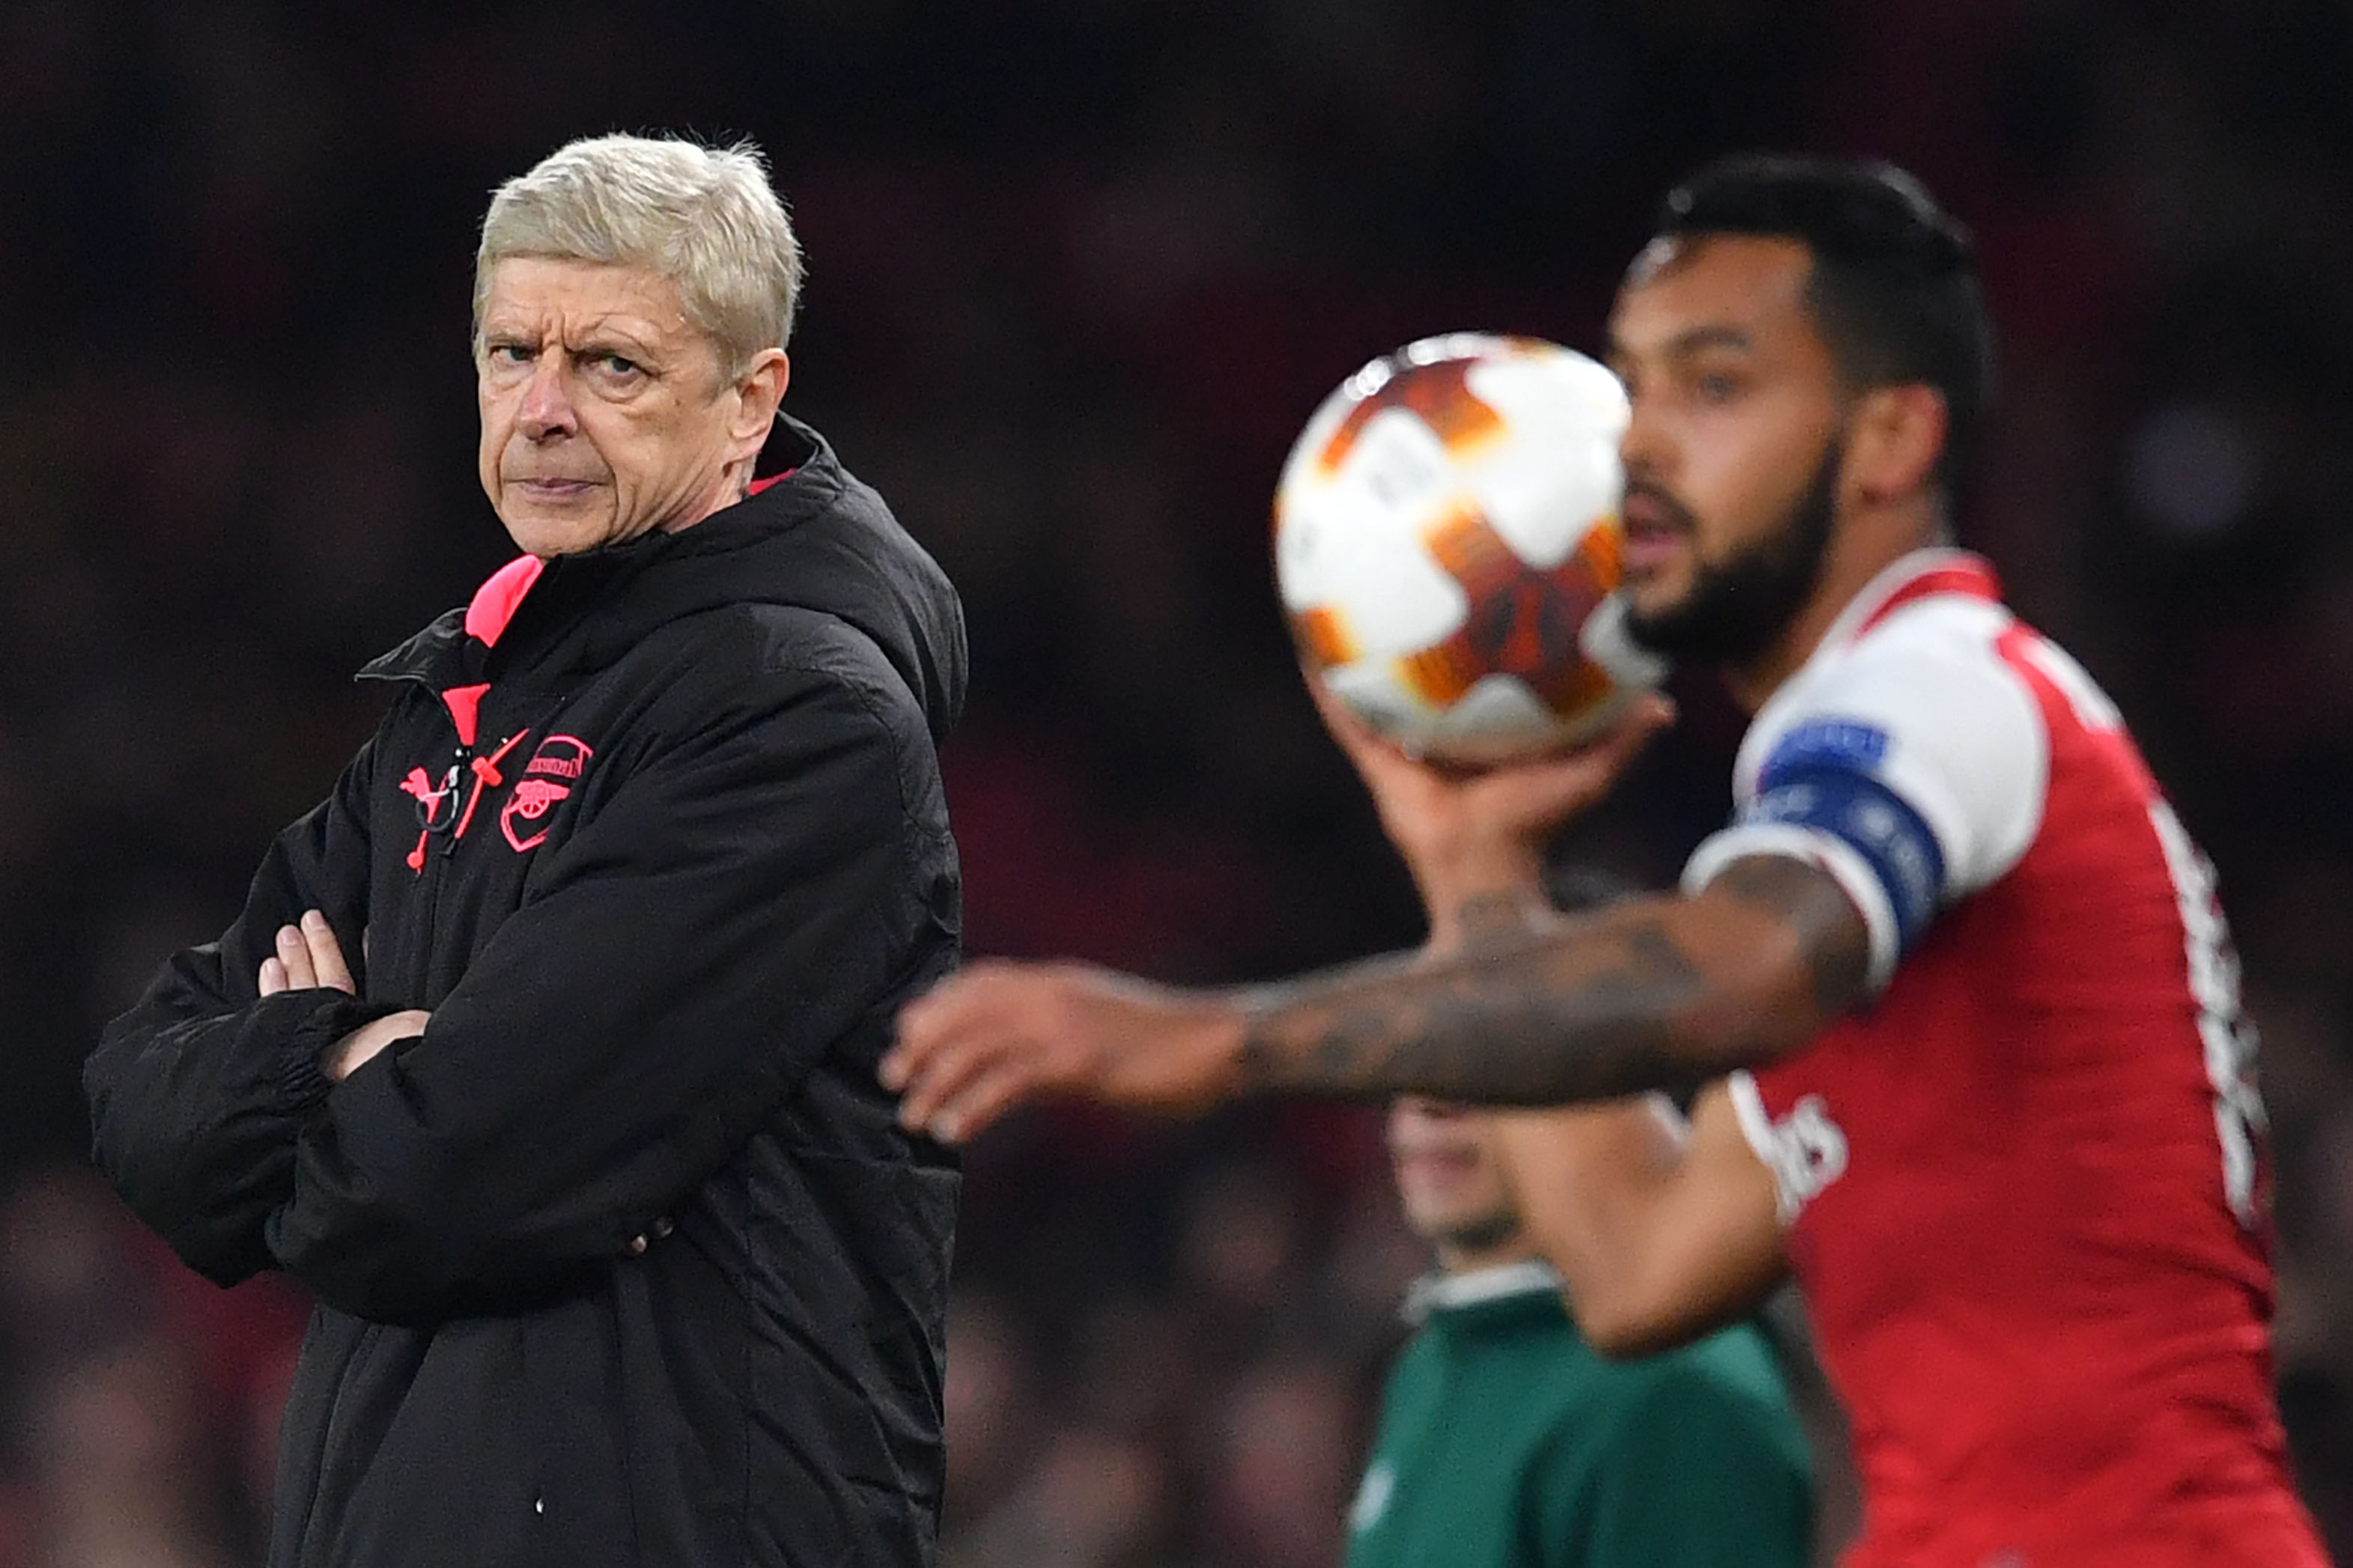 Arsenal's French manager Arsene Wenger (L) looks on as Arsenal's English midfielder Theo Walcott takes a throw-in during the UEFA Europa League Group H football match between Arsenal and Red Star Belgrade at The Emirates Stadium in London on November 2, 2017. / AFP PHOTO / Ben STANSALL        (Photo credit should read BEN STANSALL/AFP/Getty Images)